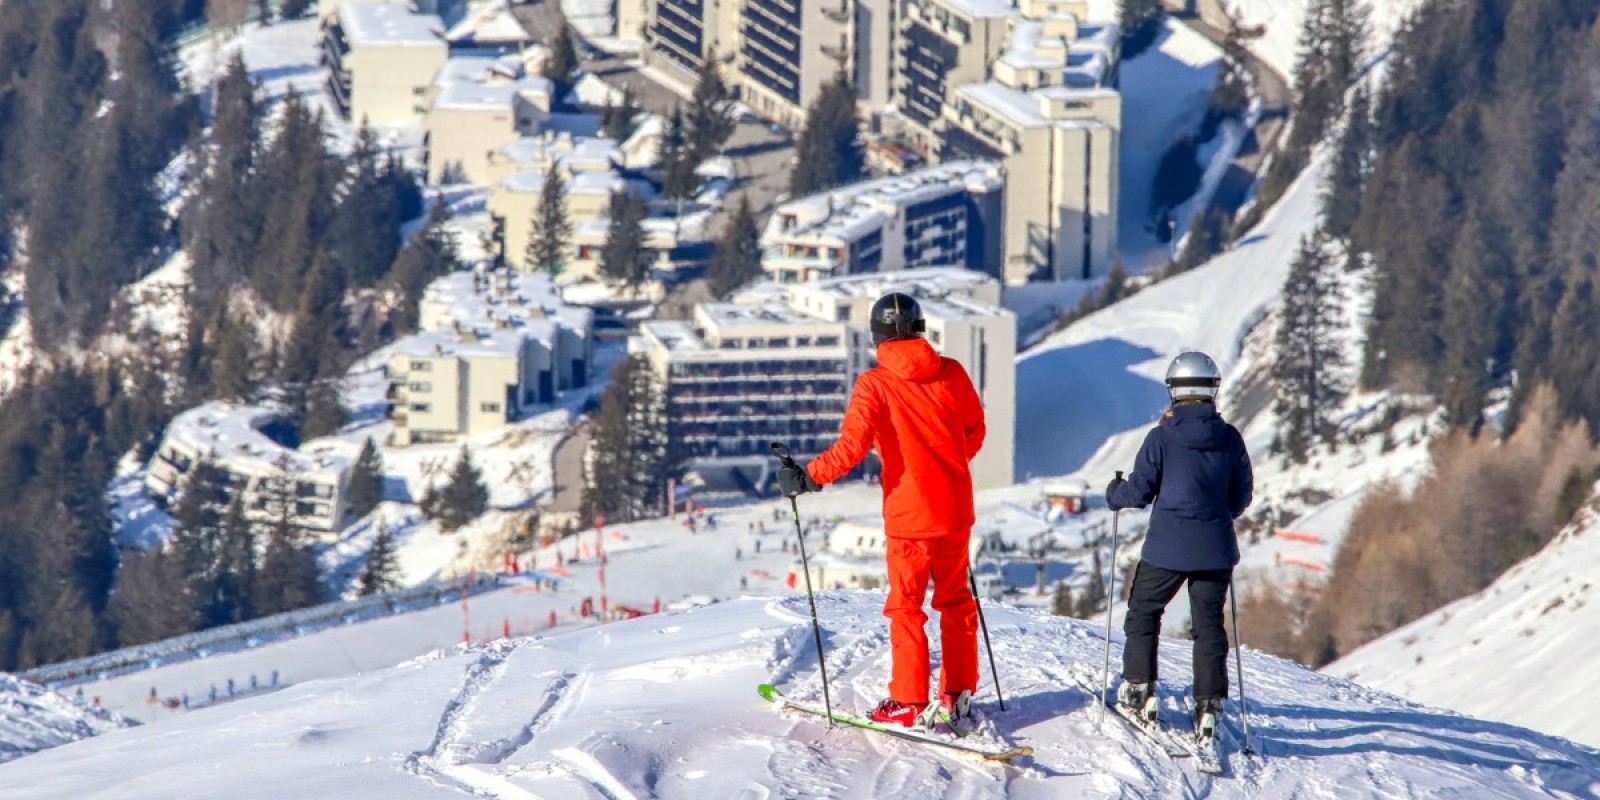 Best Ski Resorts For A Long Weekend